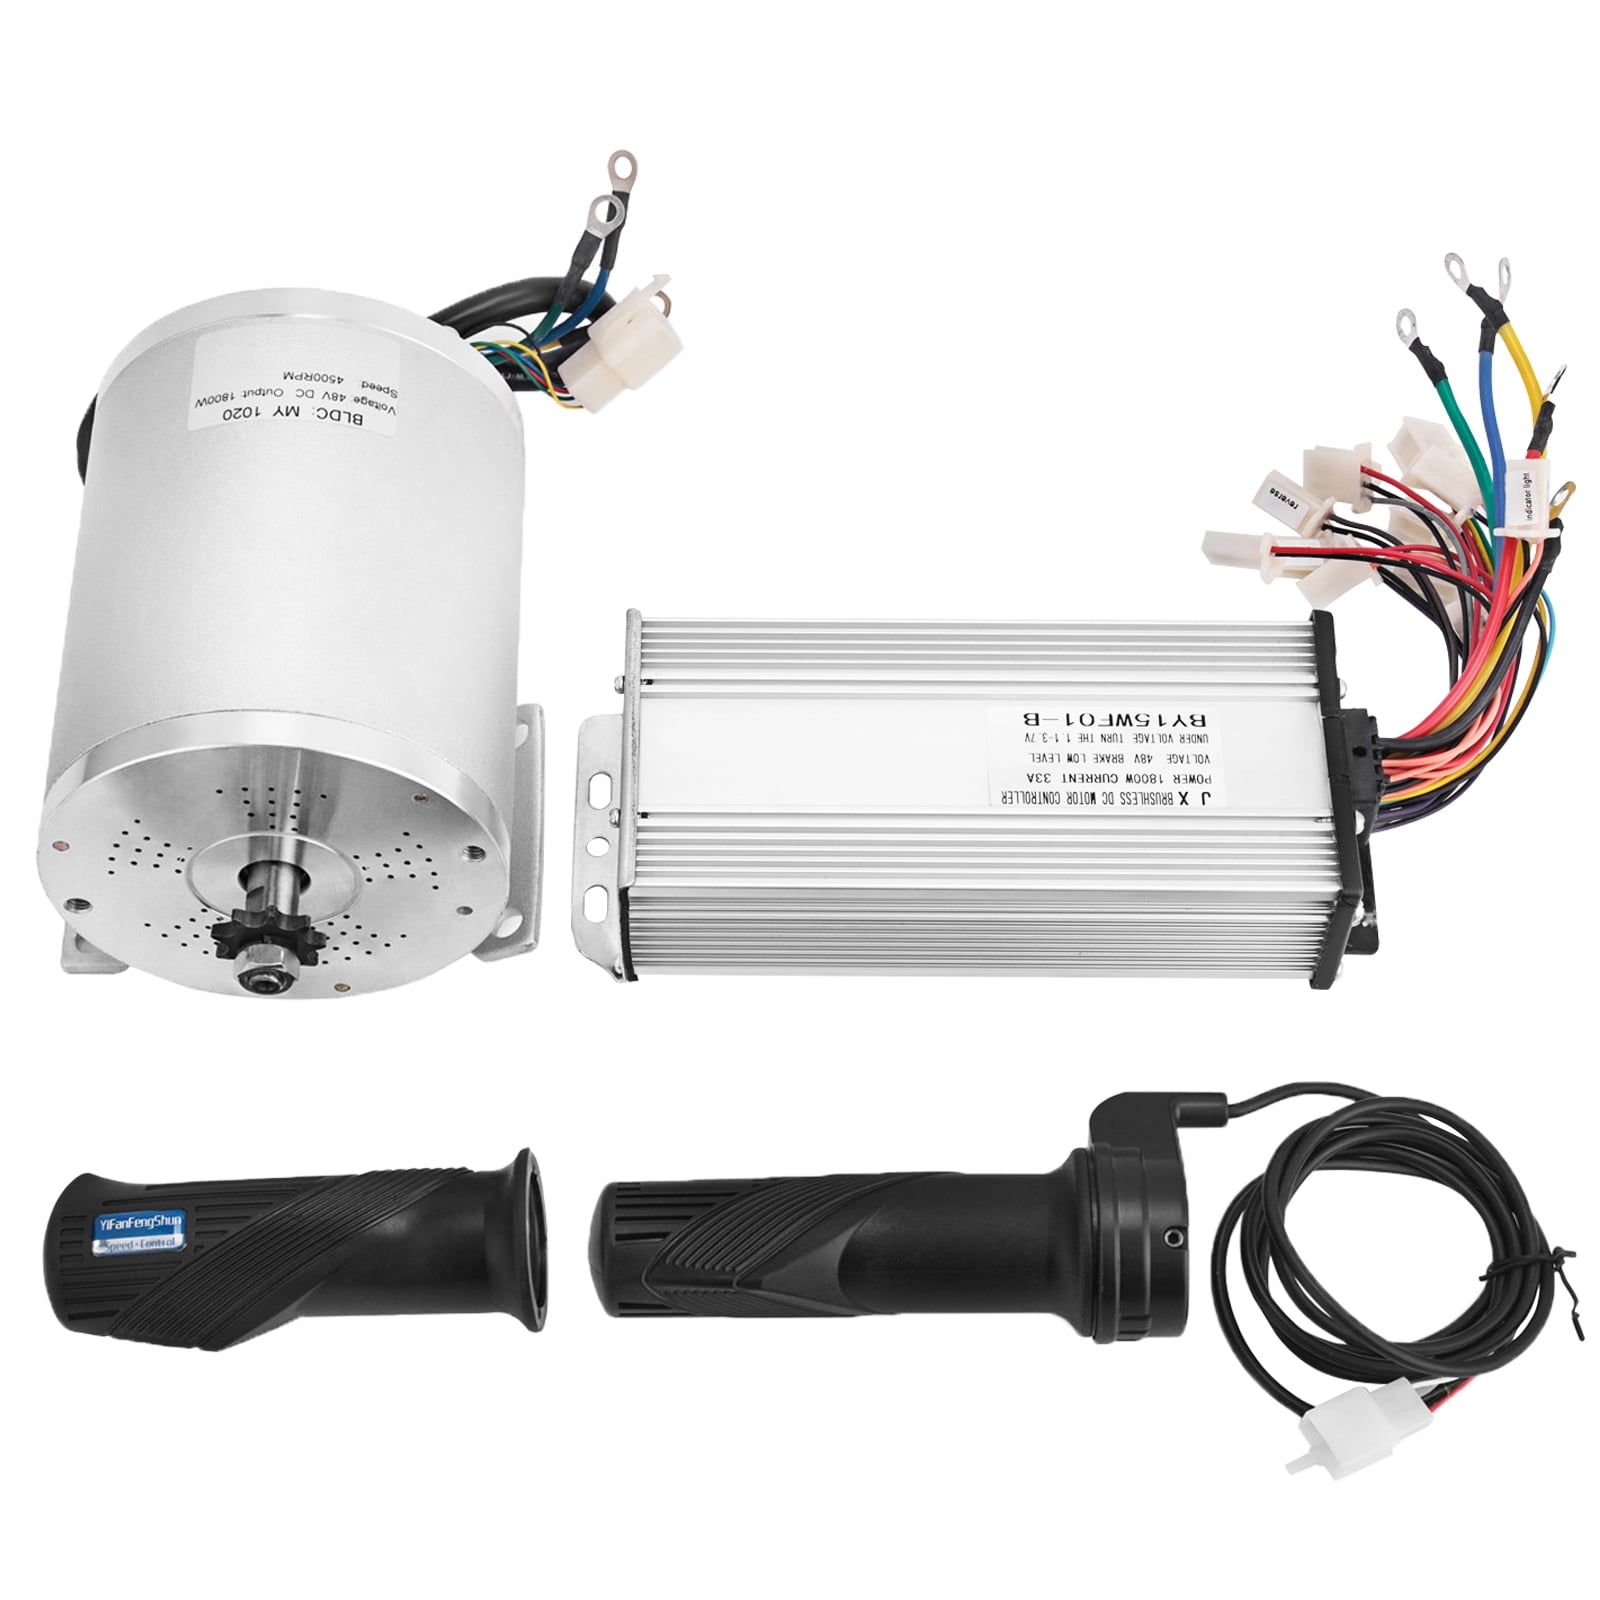 Mophorn 2000W 60V Electric Brushless DC Motor 42A 5600RPM High Speed Brushless Motor with 11 Tooth Sprocket and Mounting Bracket for Go Karts Scooters & E-Bike Model BY1020D 